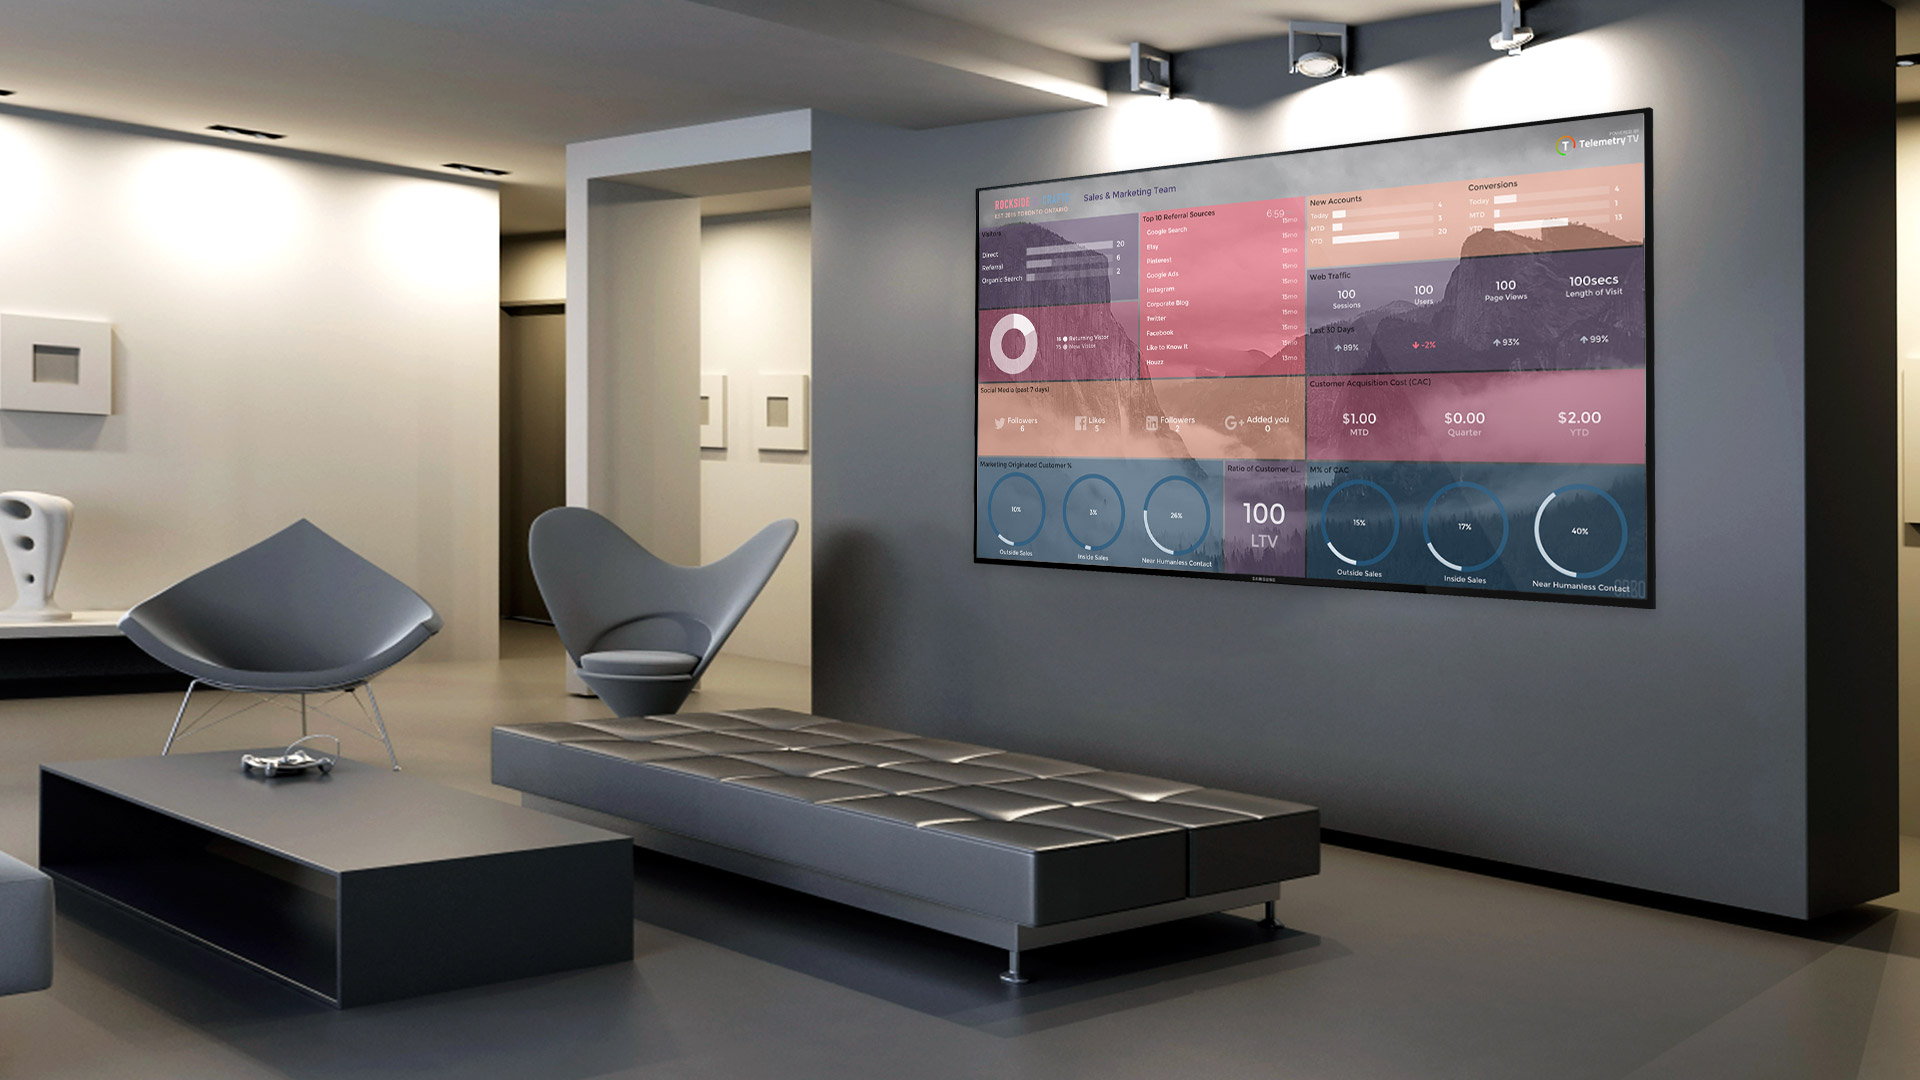 Why your Business needs Digital Signage Display?